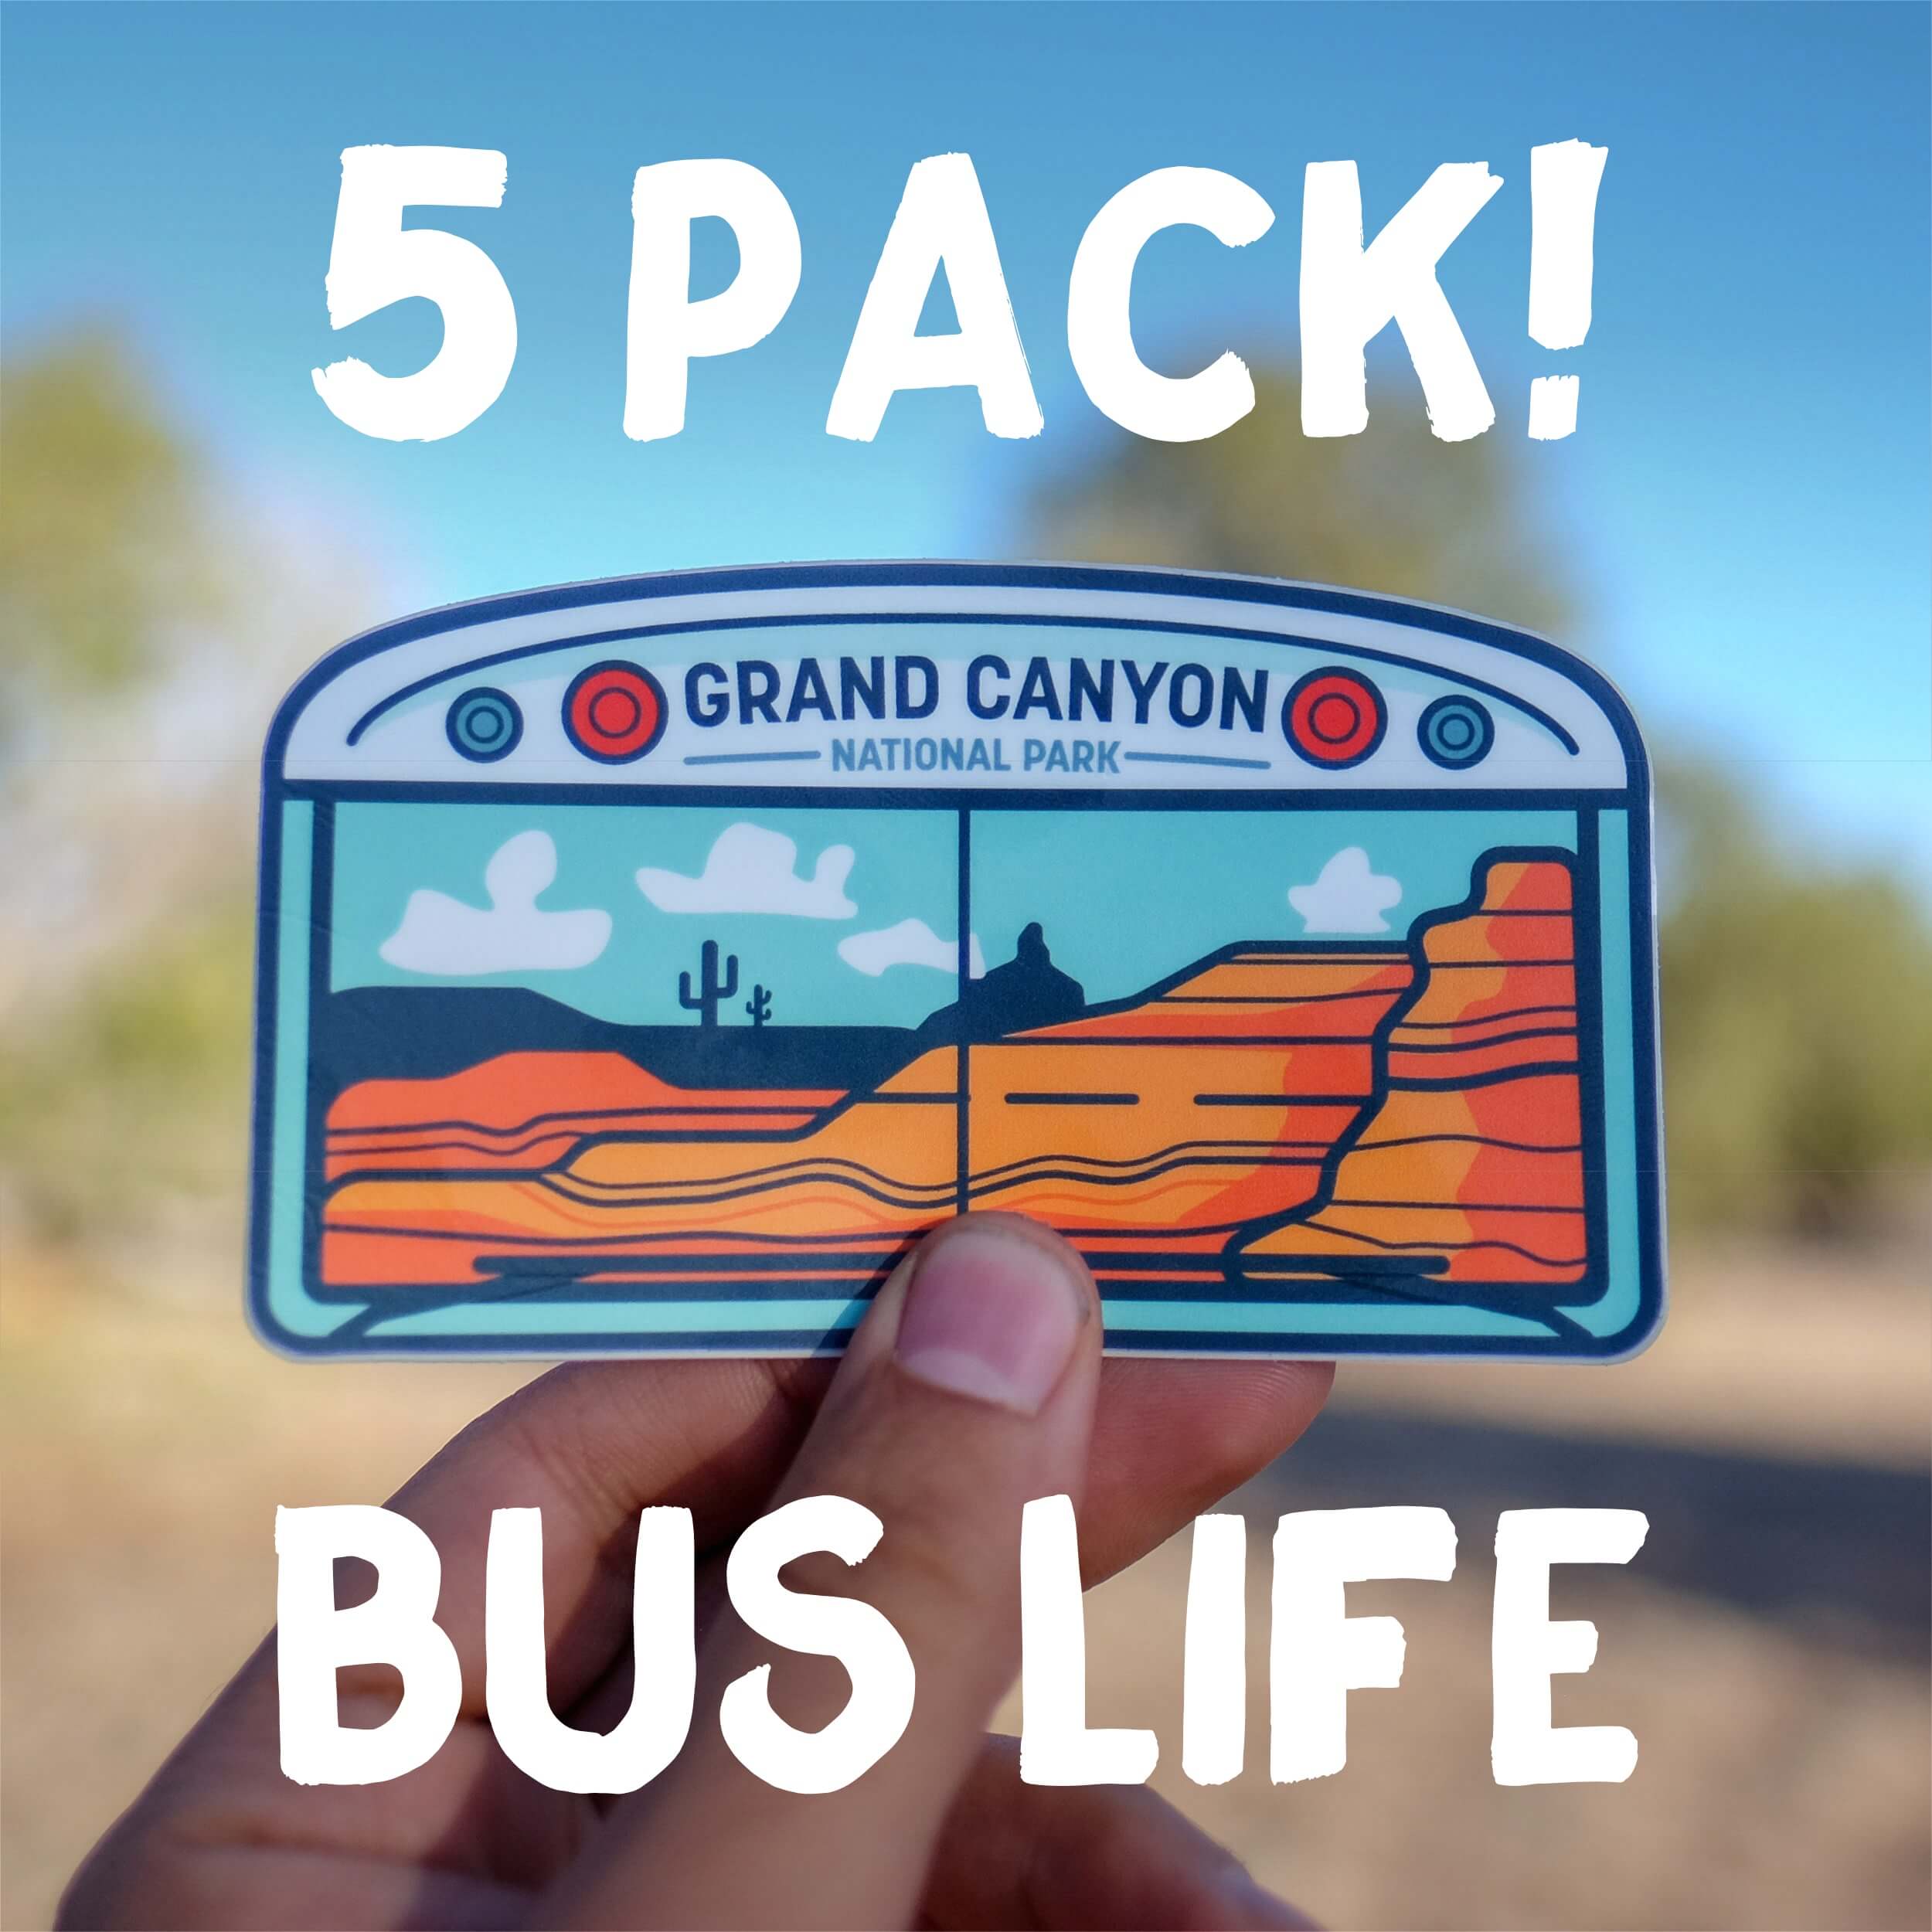 https://adventureorbust.com/wp-content/uploads/2018/05/5-Pack-of-Bus-Life-National-Park-Stickers.jpg